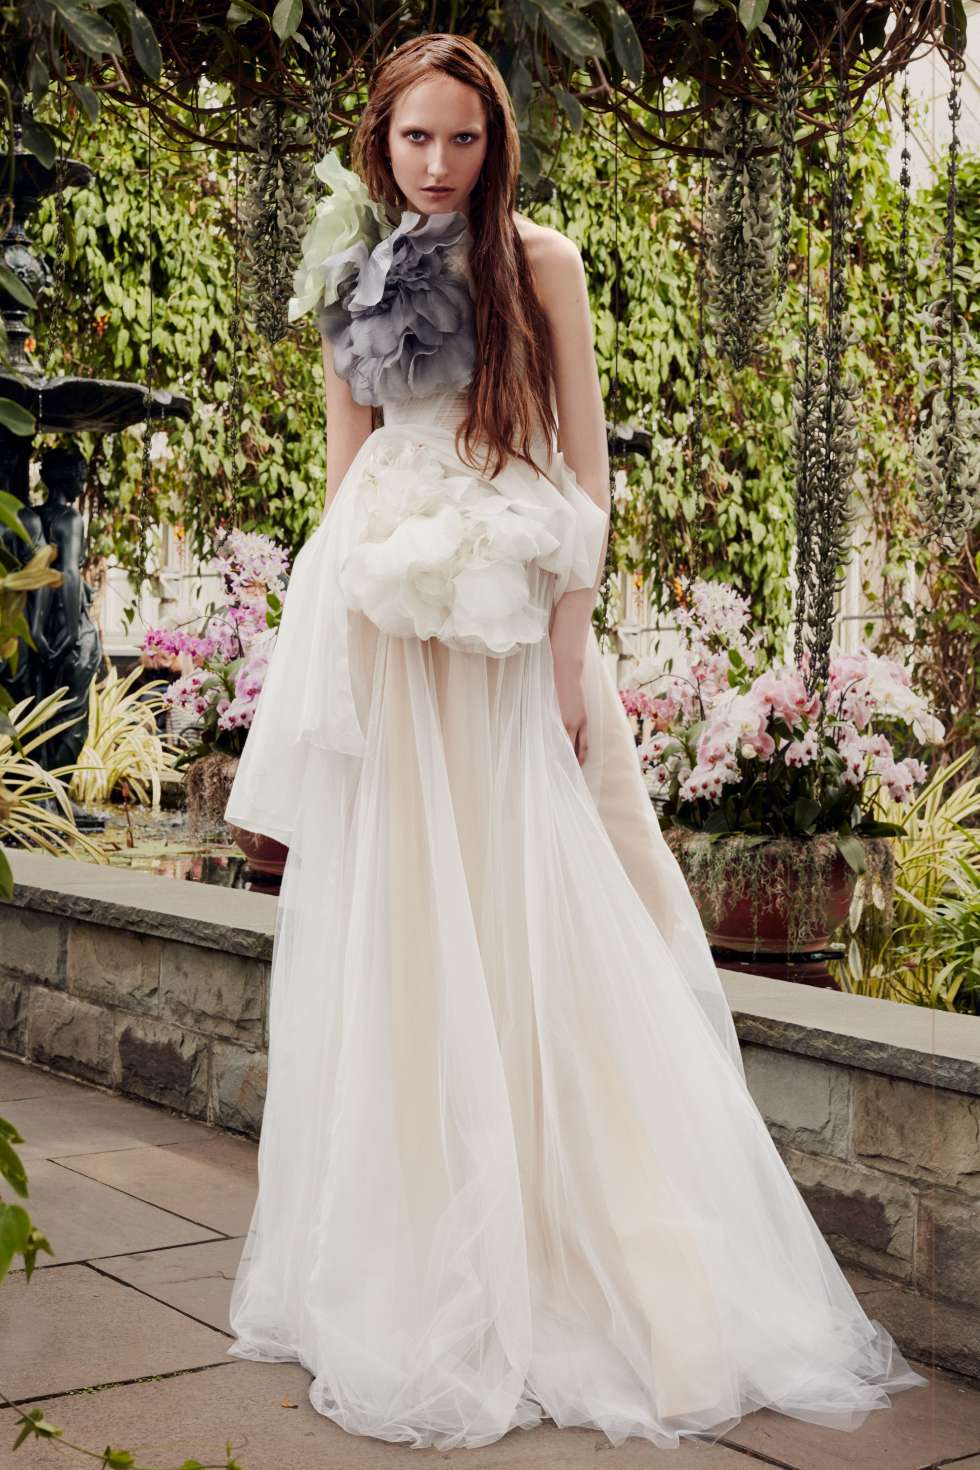 The 2020 Wedding Dress Collection by Vera Wang 2